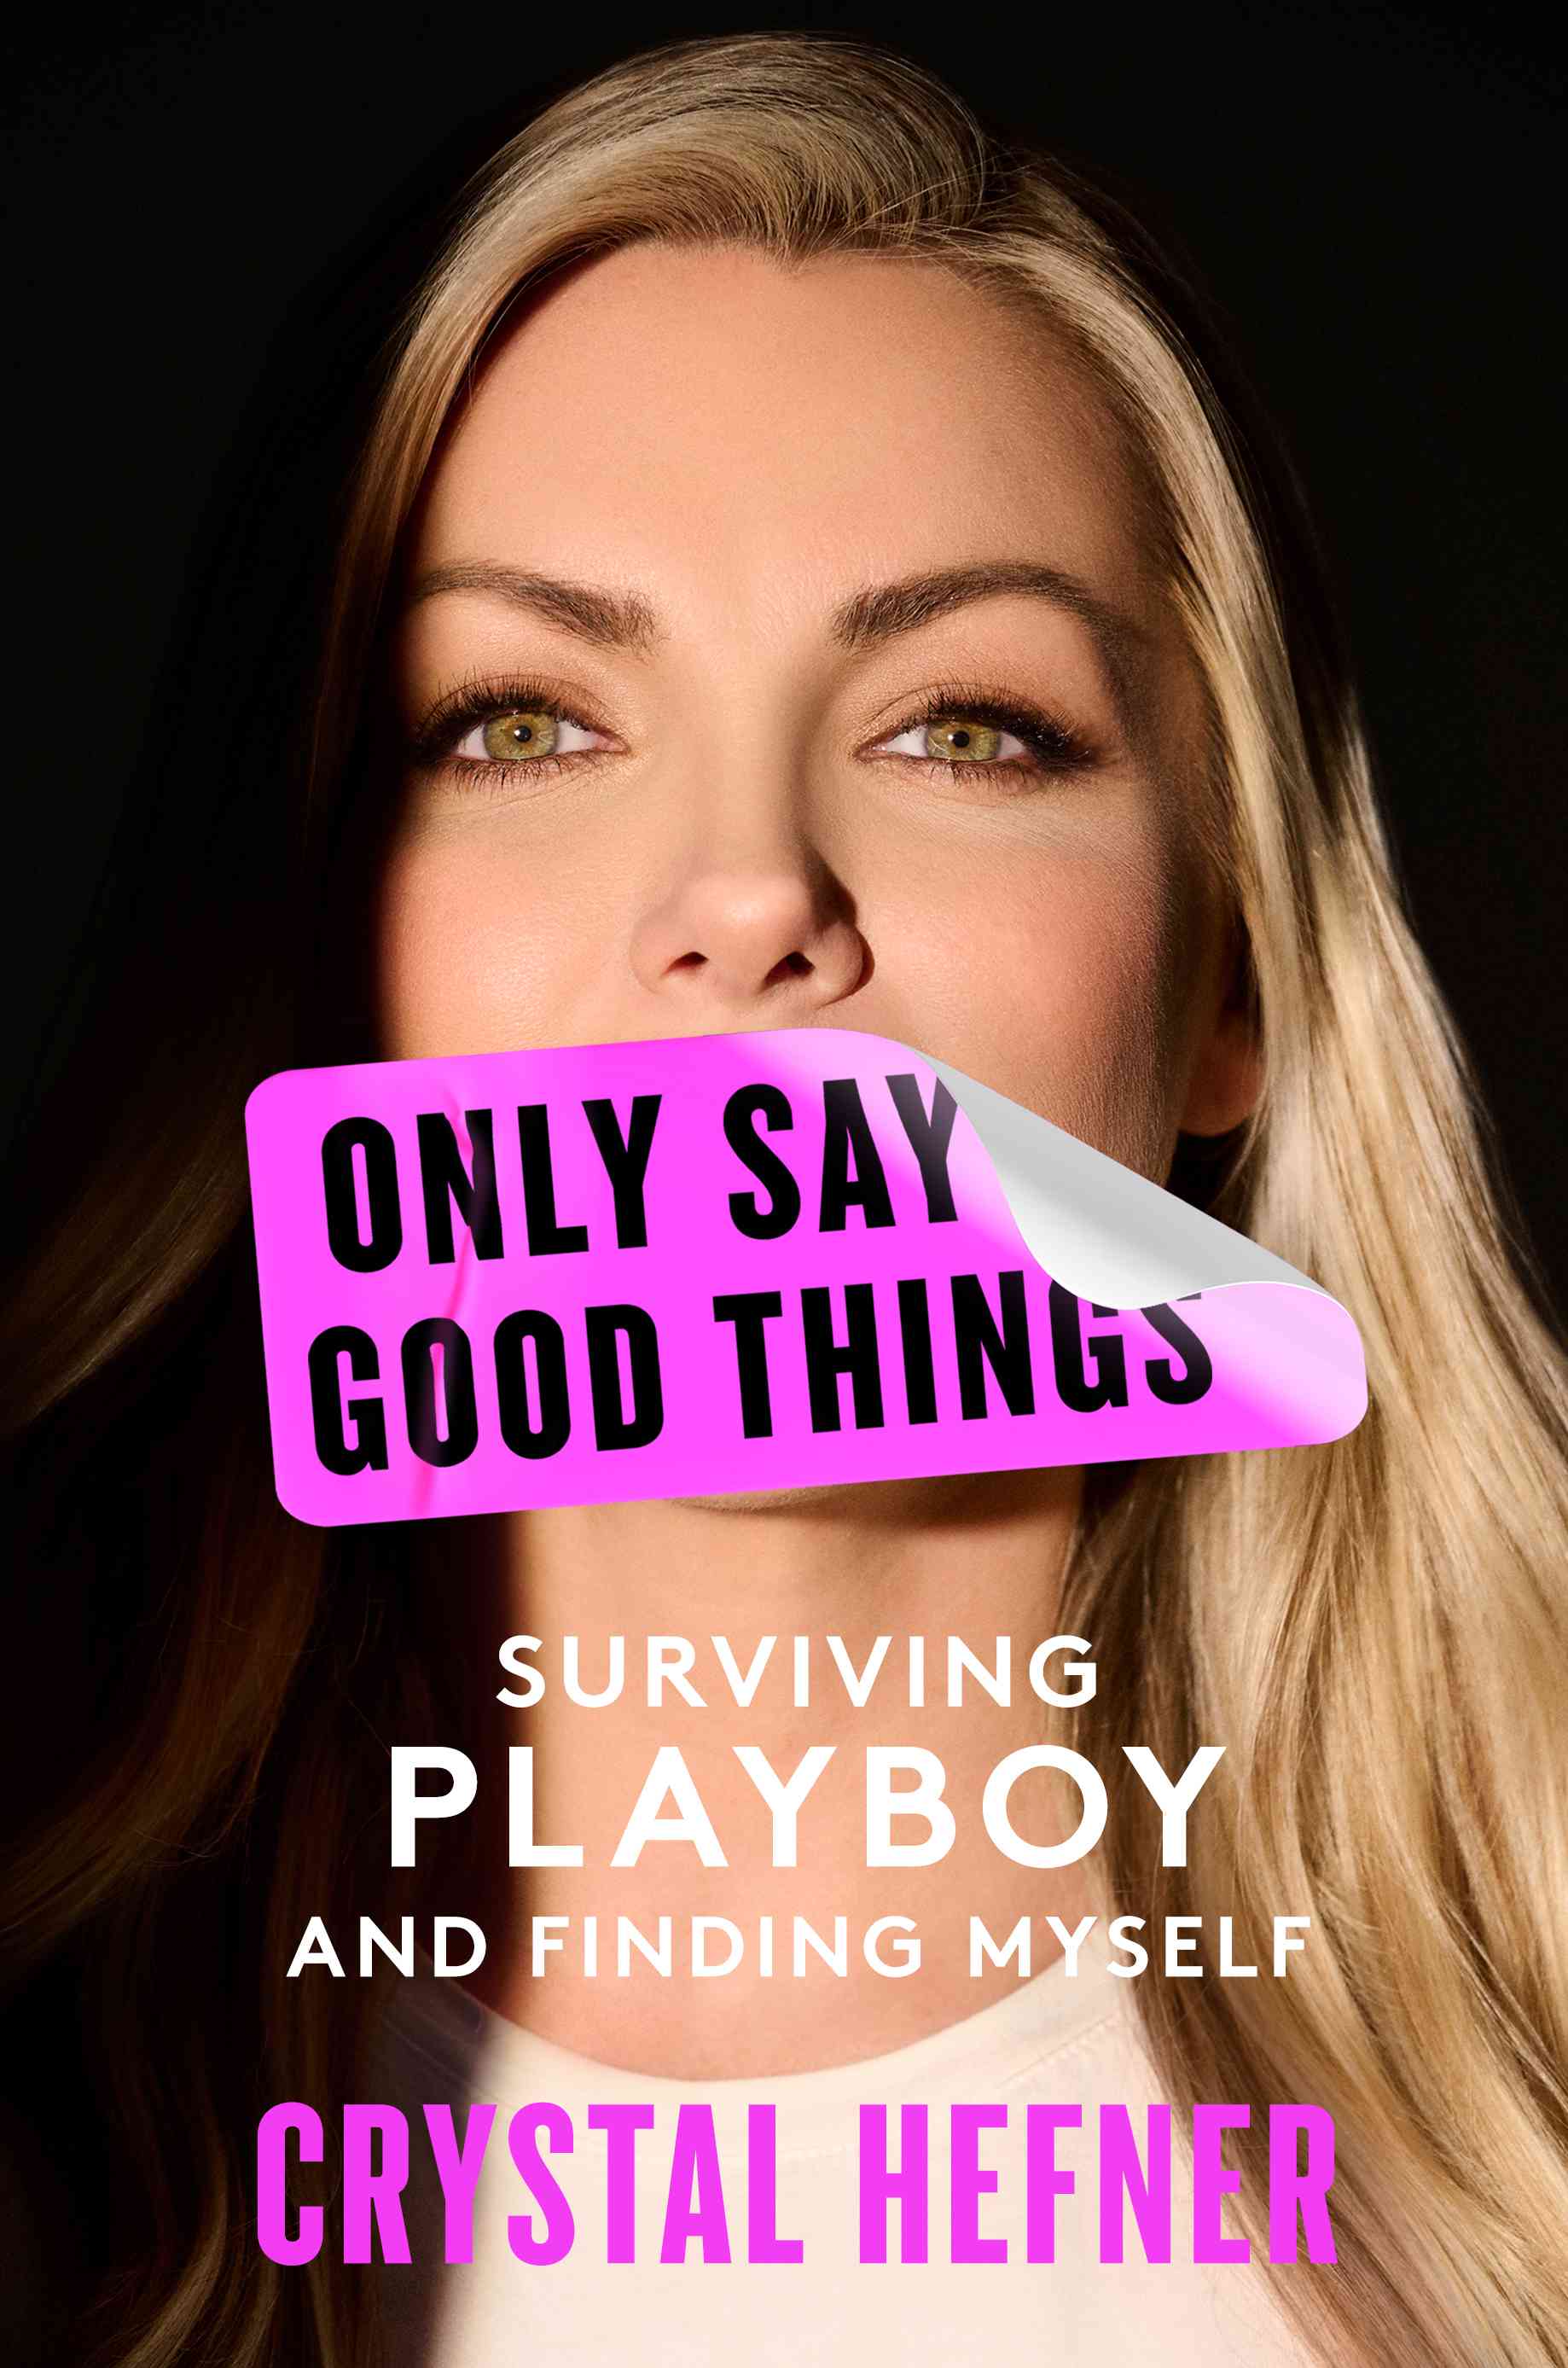 Only Say Good Things by Crystal Hefner